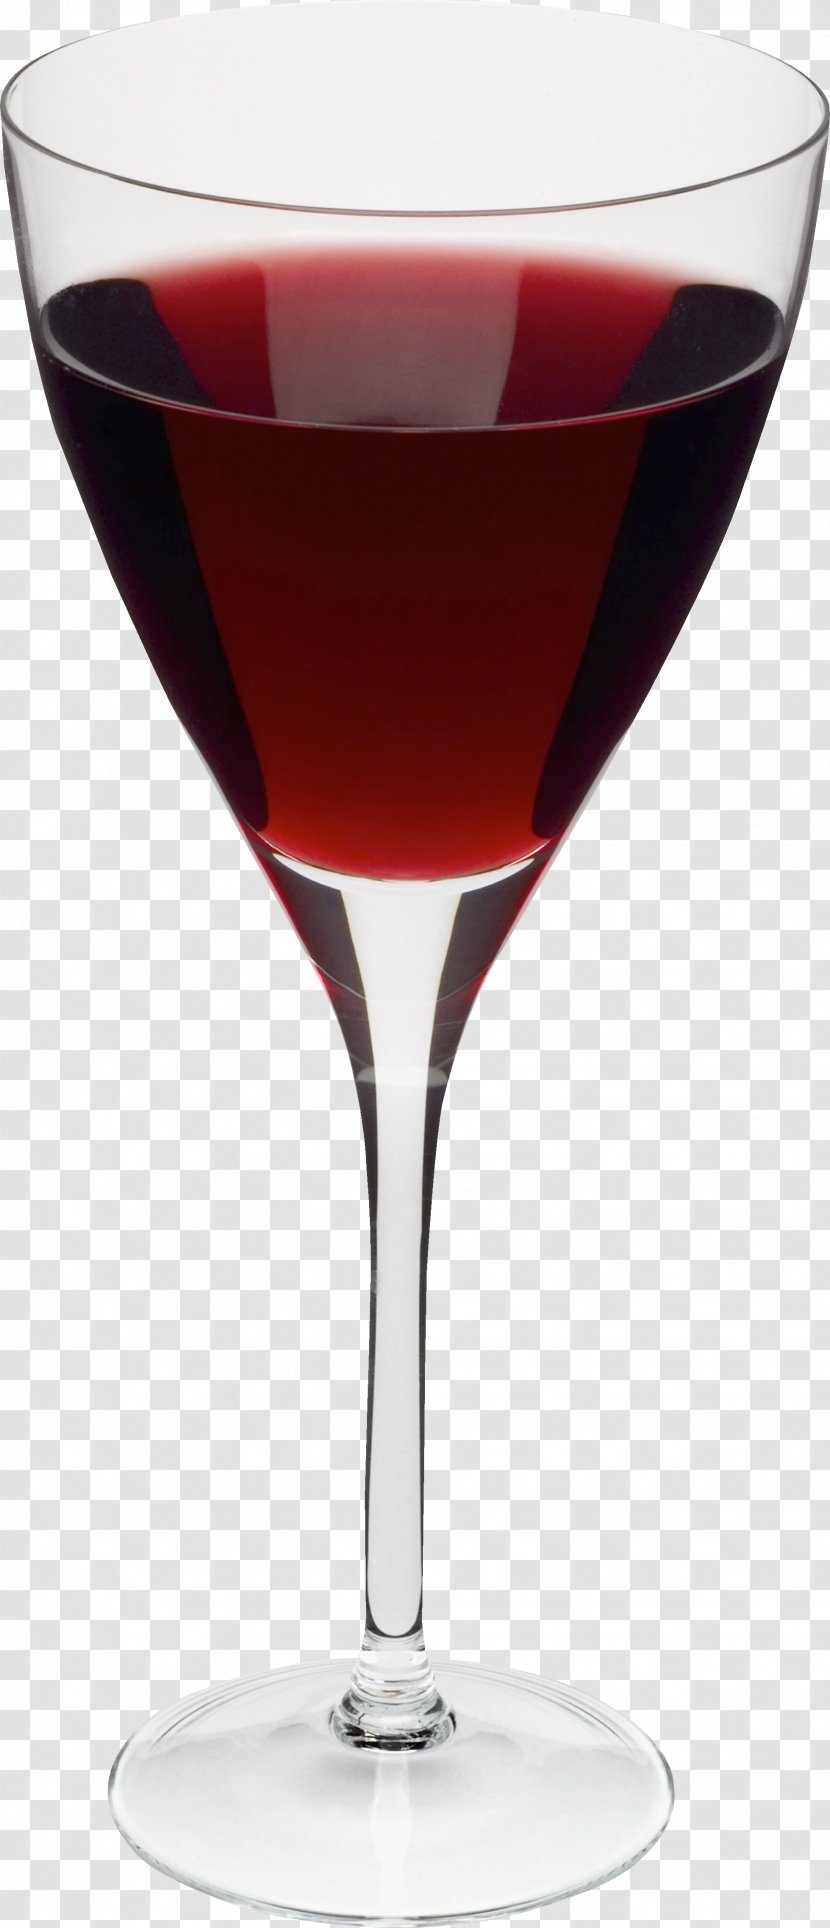 Red Wine Champagne Glass - Cocktail - Image Transparent PNG